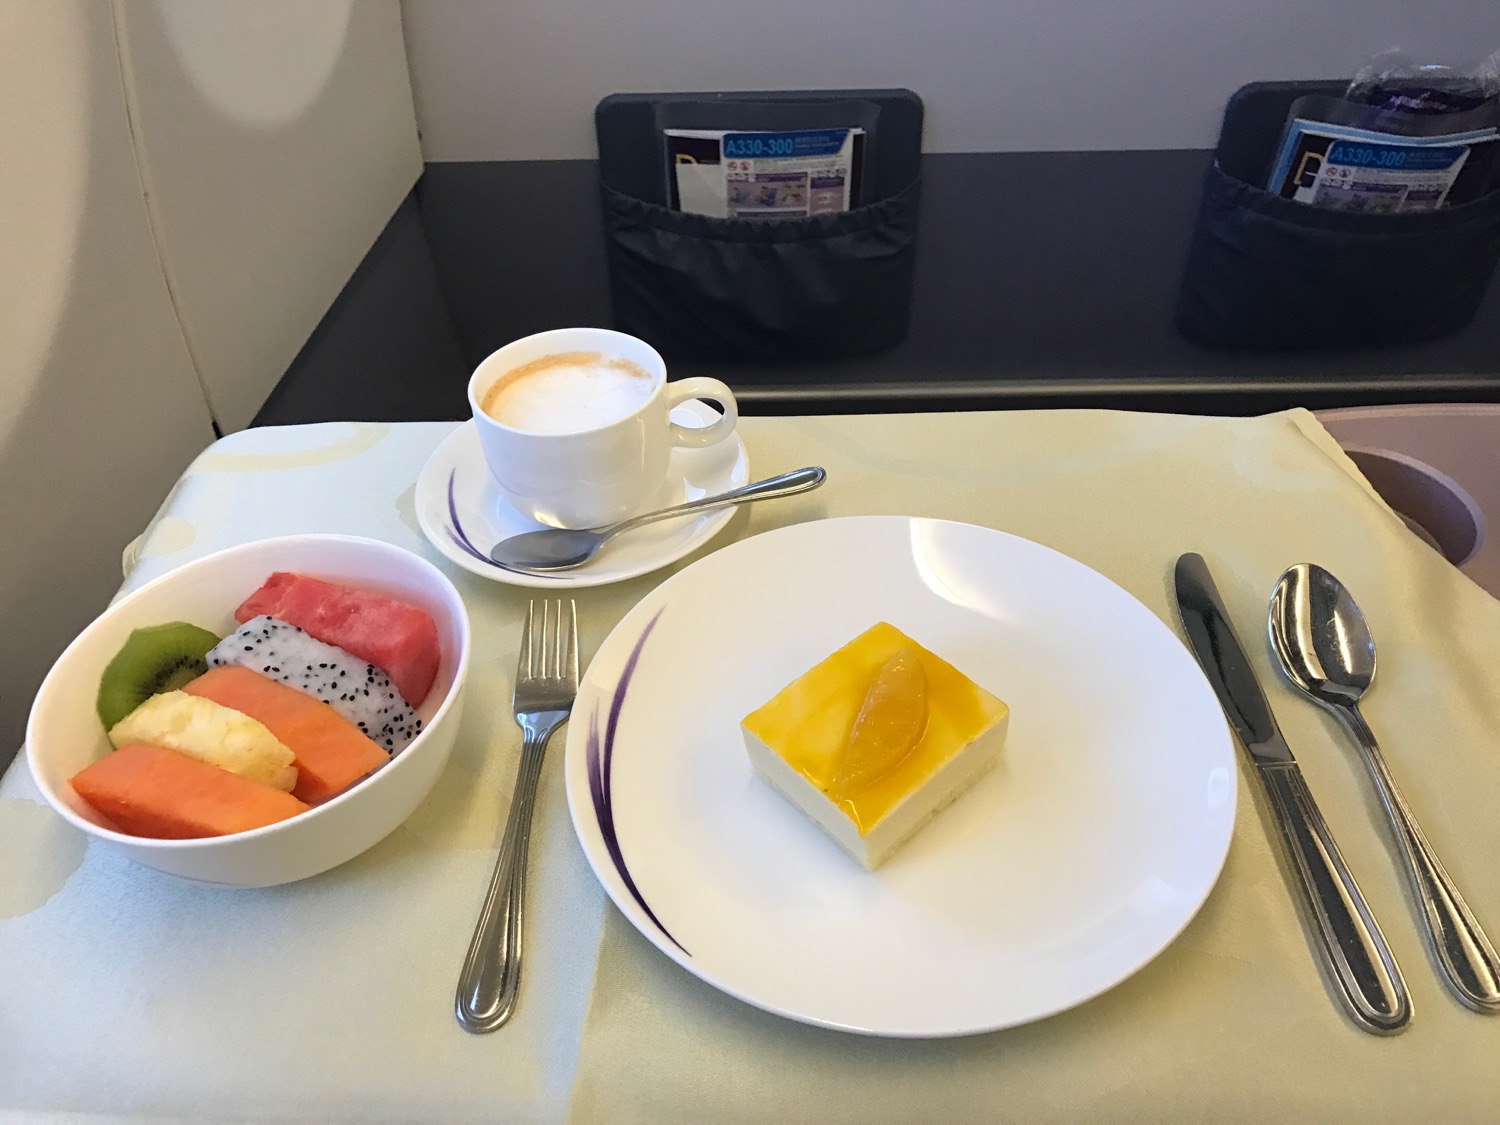 China Airlines A330 Business Class - 4